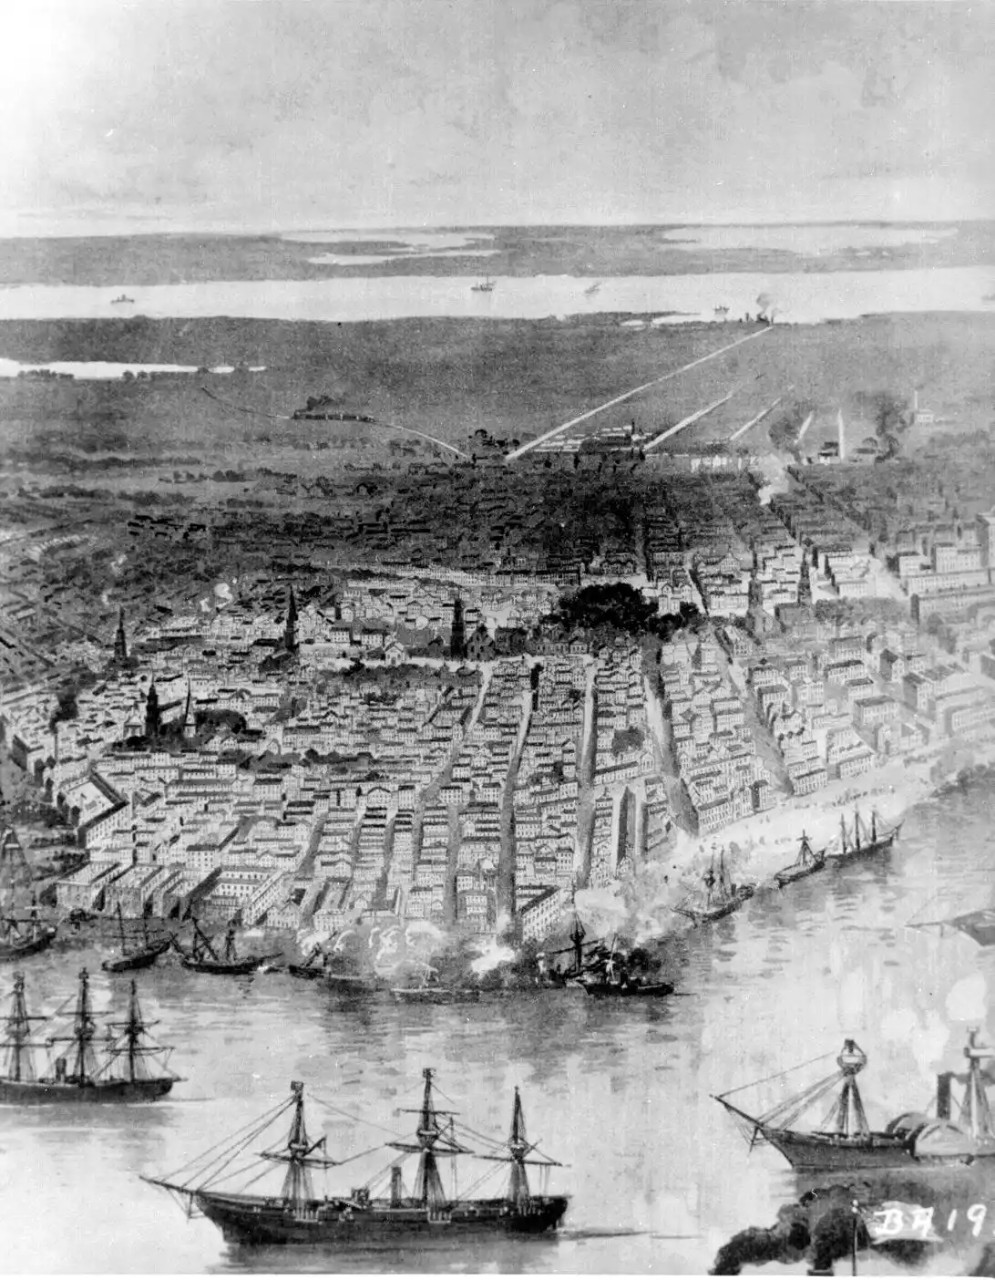 A fleet of ships arrayed in a harbor with a city visible in the background.